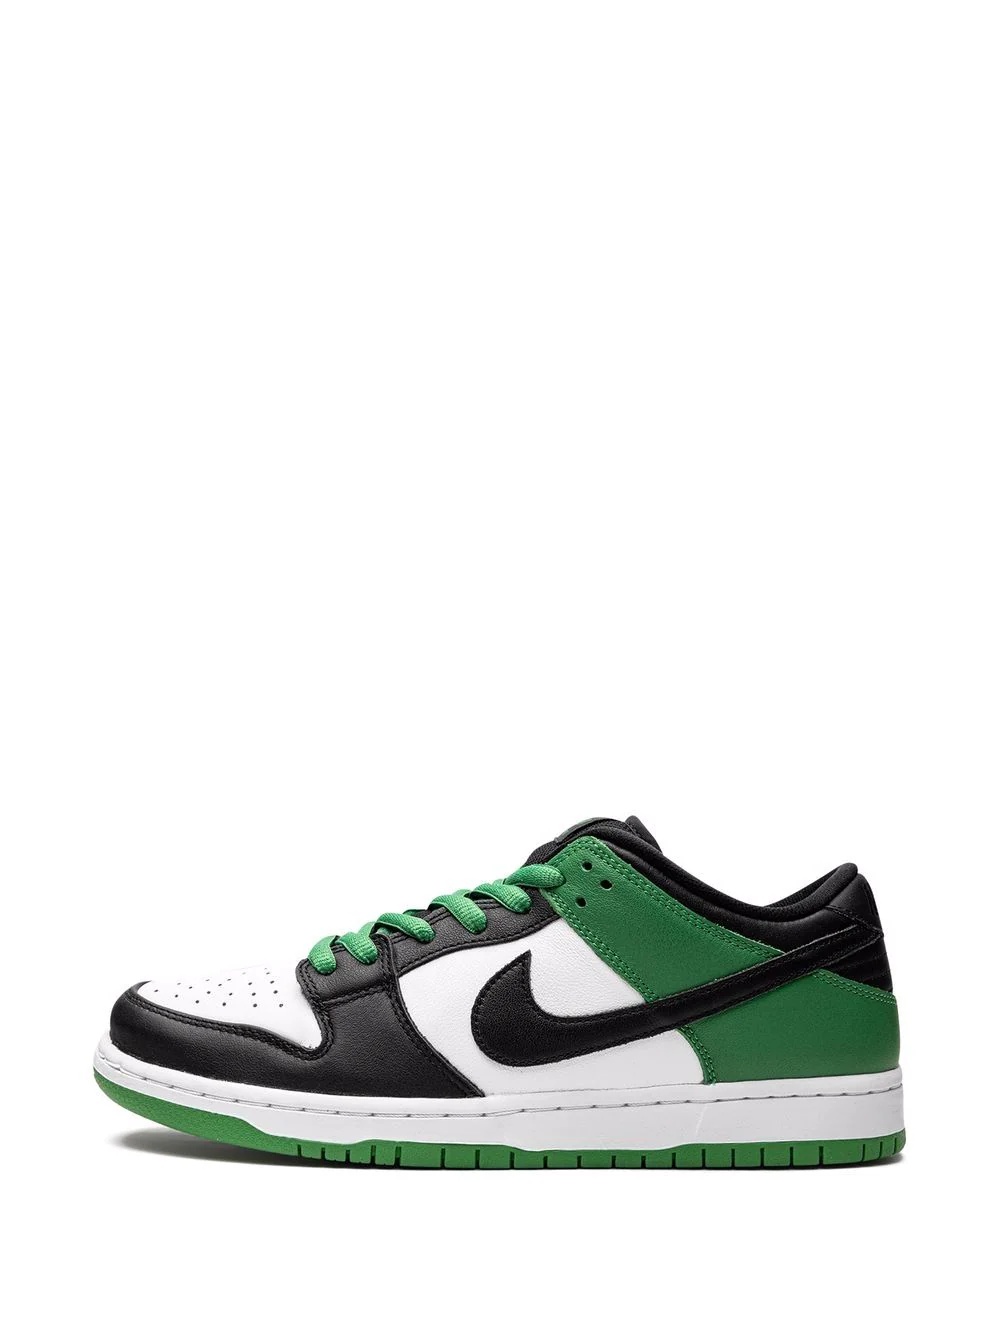 Dunk Low Pro SB "Classic Green" sneakers - 5